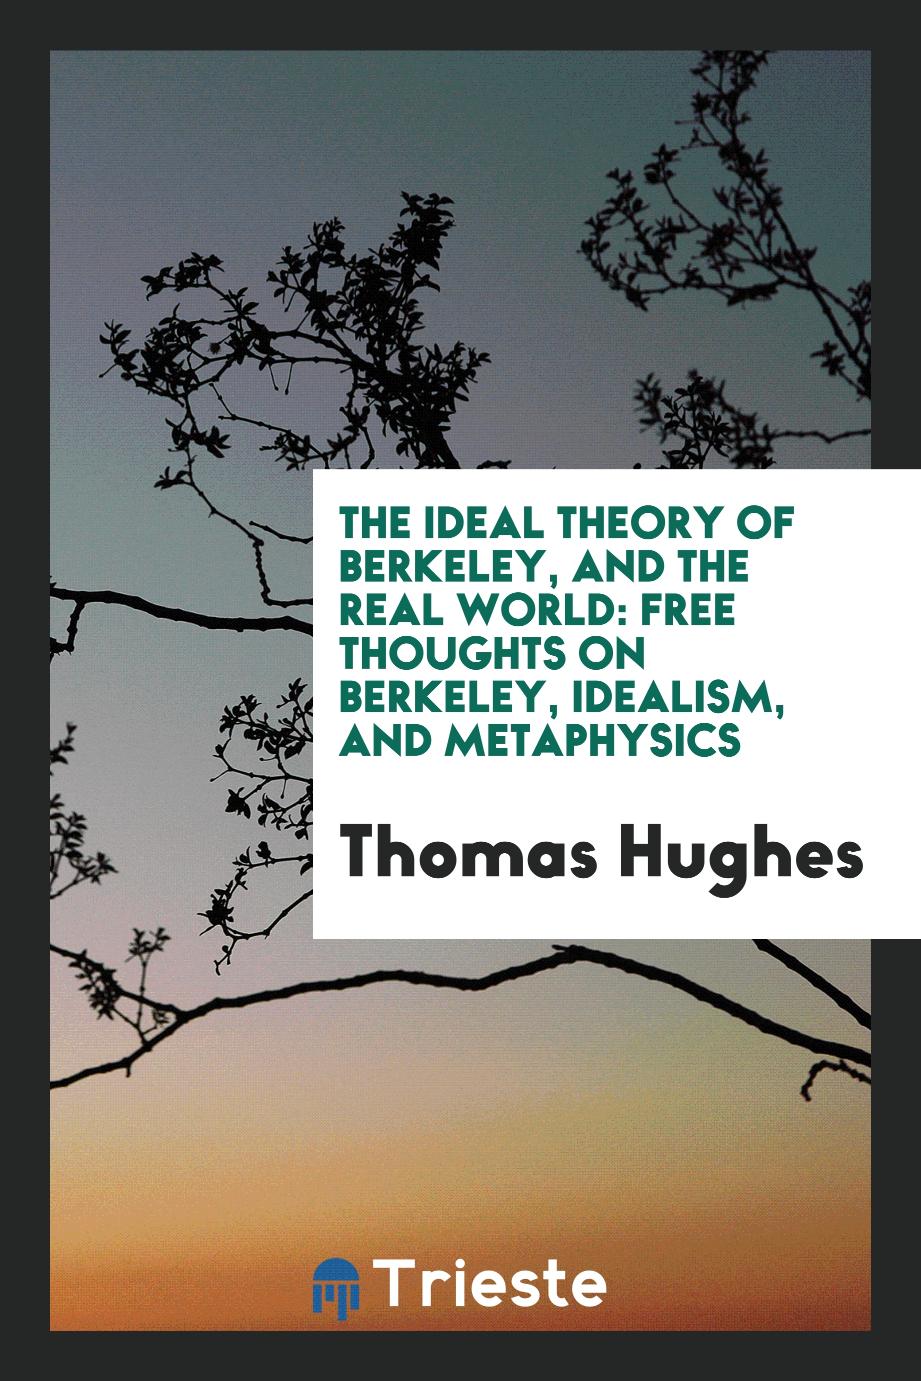 The Ideal Theory of Berkeley, and the Real World: Free Thoughts on Berkeley, Idealism, and Metaphysics